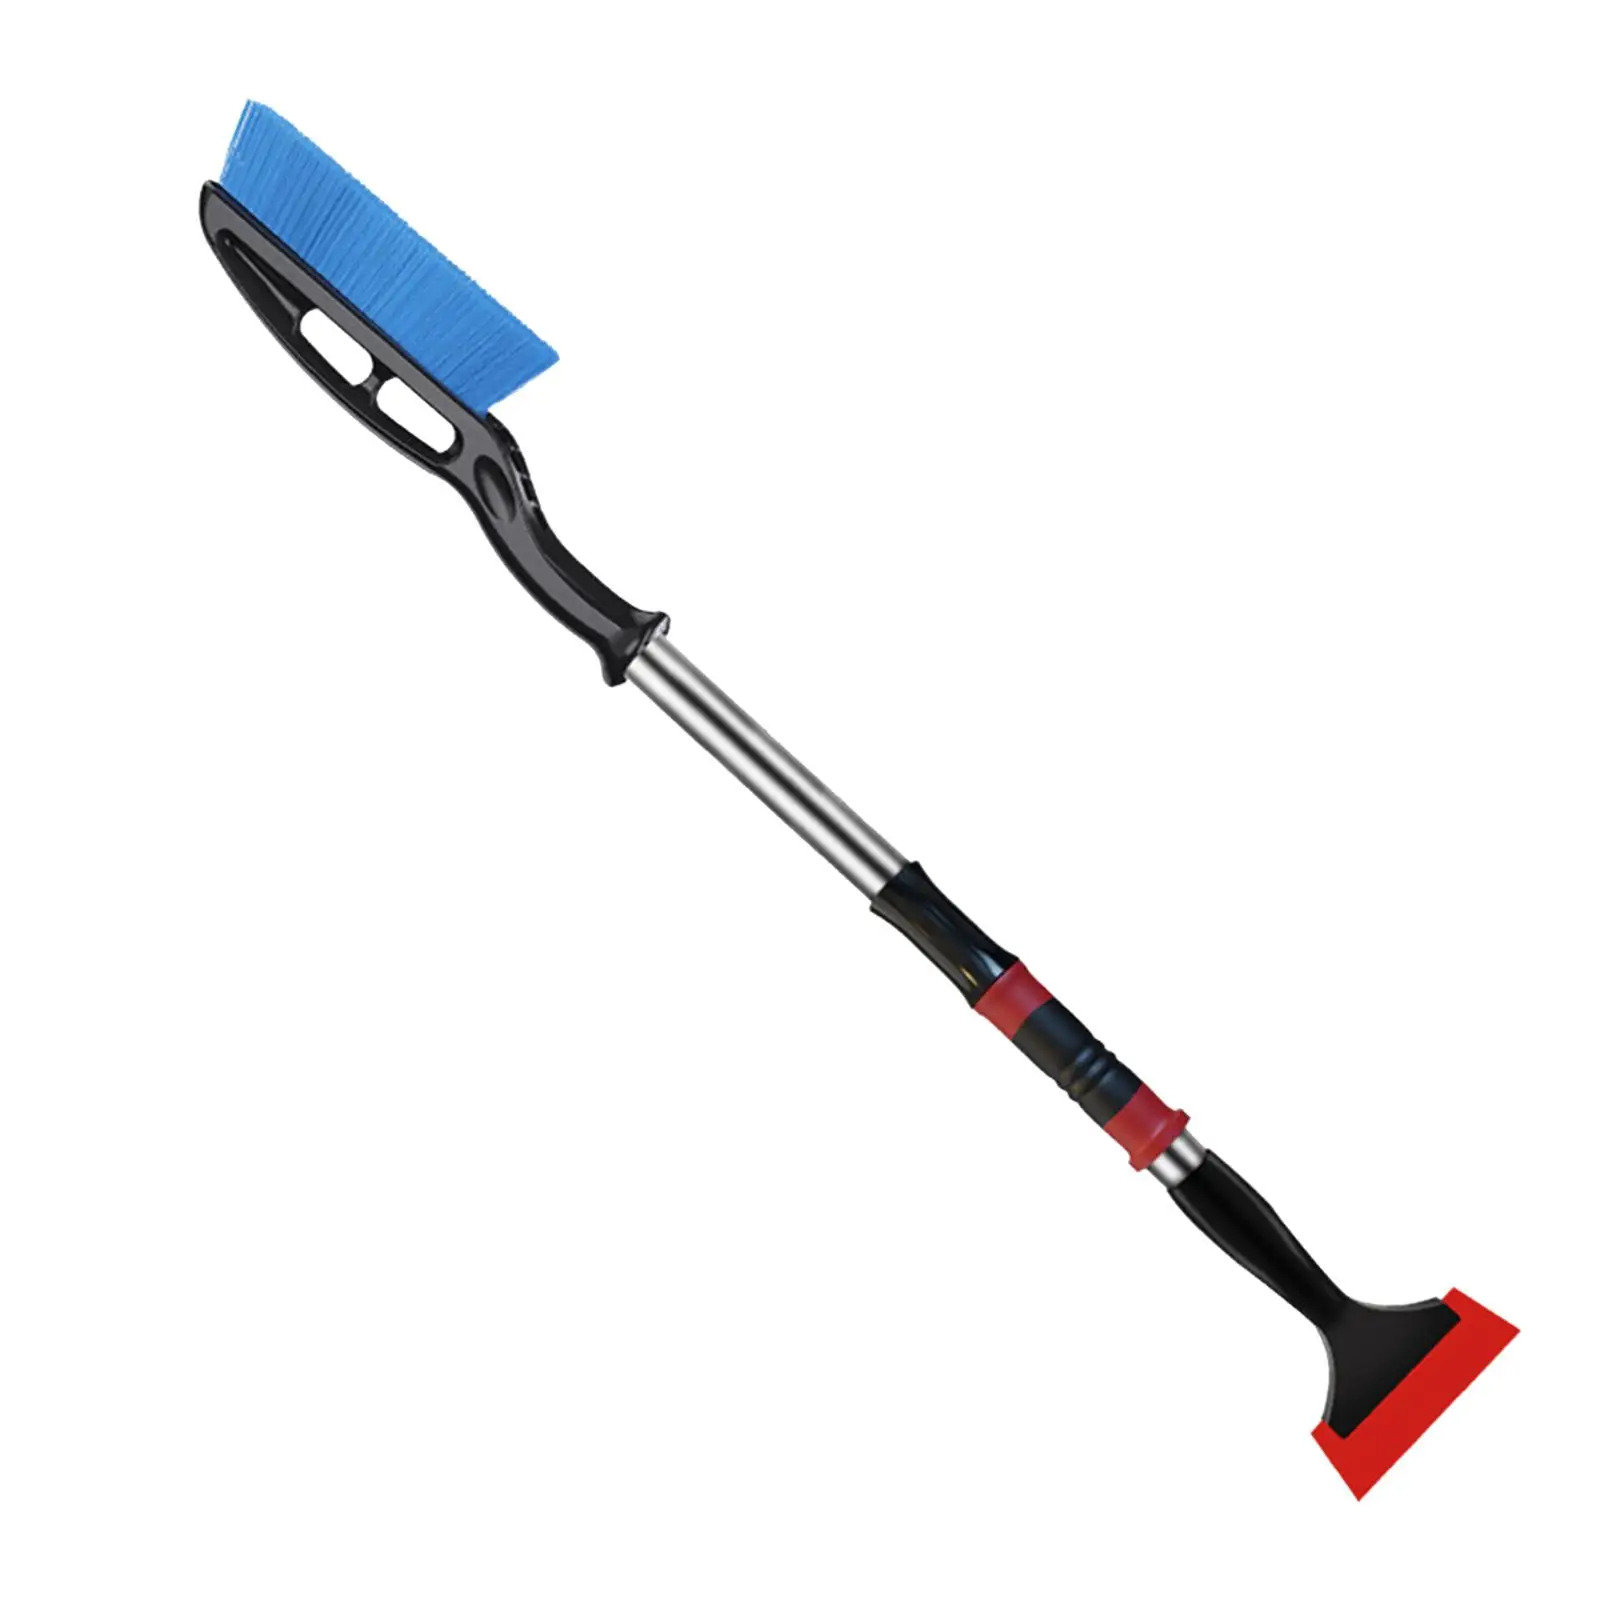 Car Snow Shovel Brush Tool Multifunctional Winter Snow Removal Snow Cleaning Universal Snow Remover for Automobile SUV Car